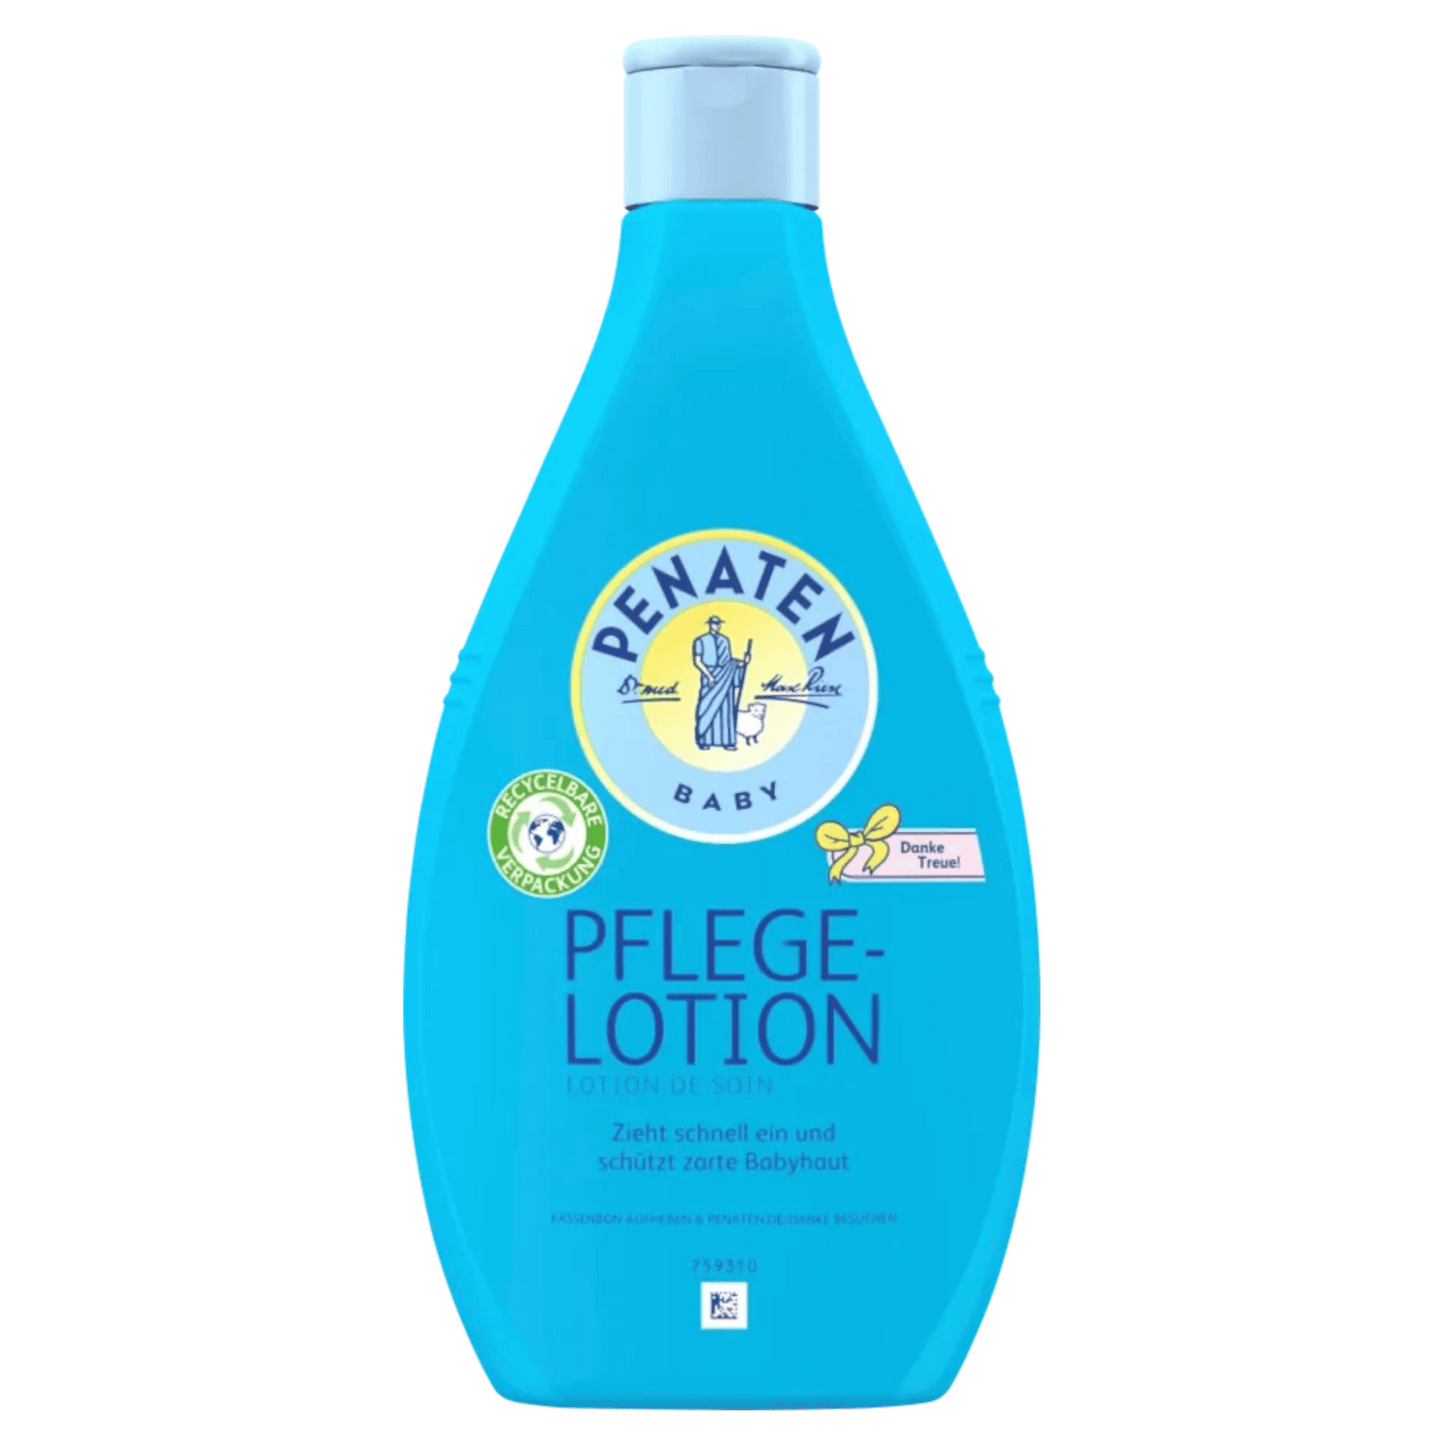 Primary Image of Care Lotion